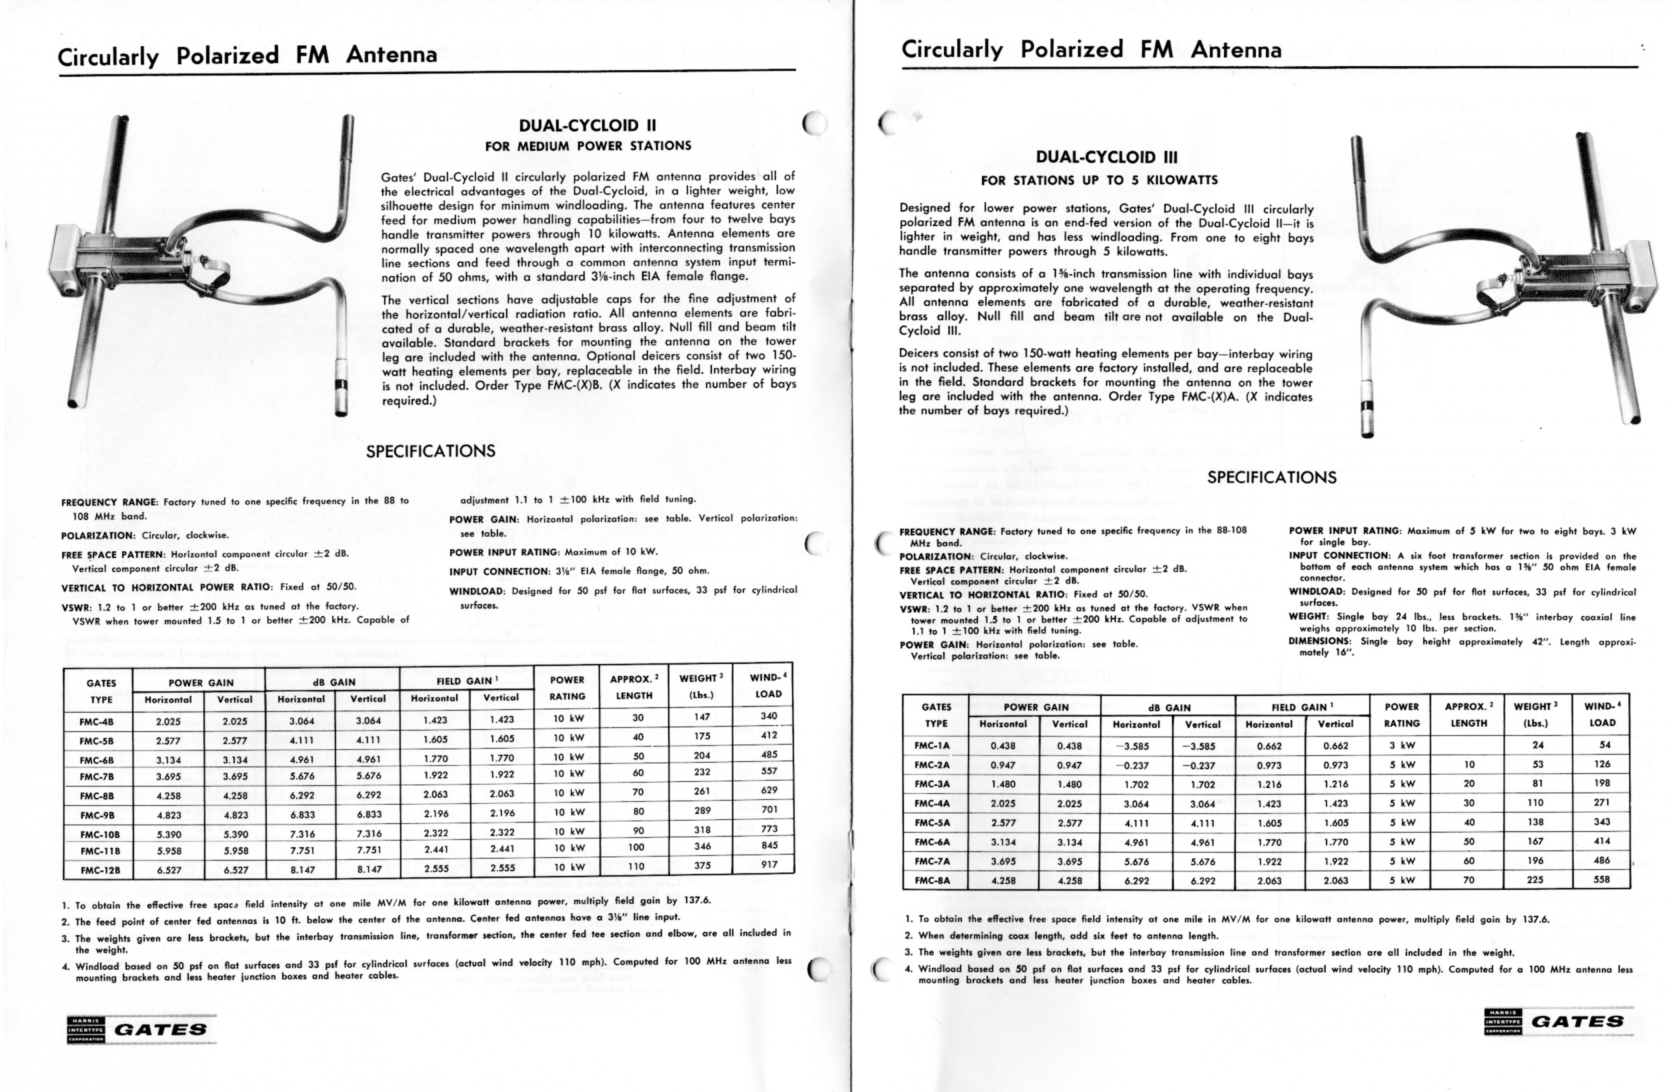 The brochure for the FM Antennas<br>Page 8 -9